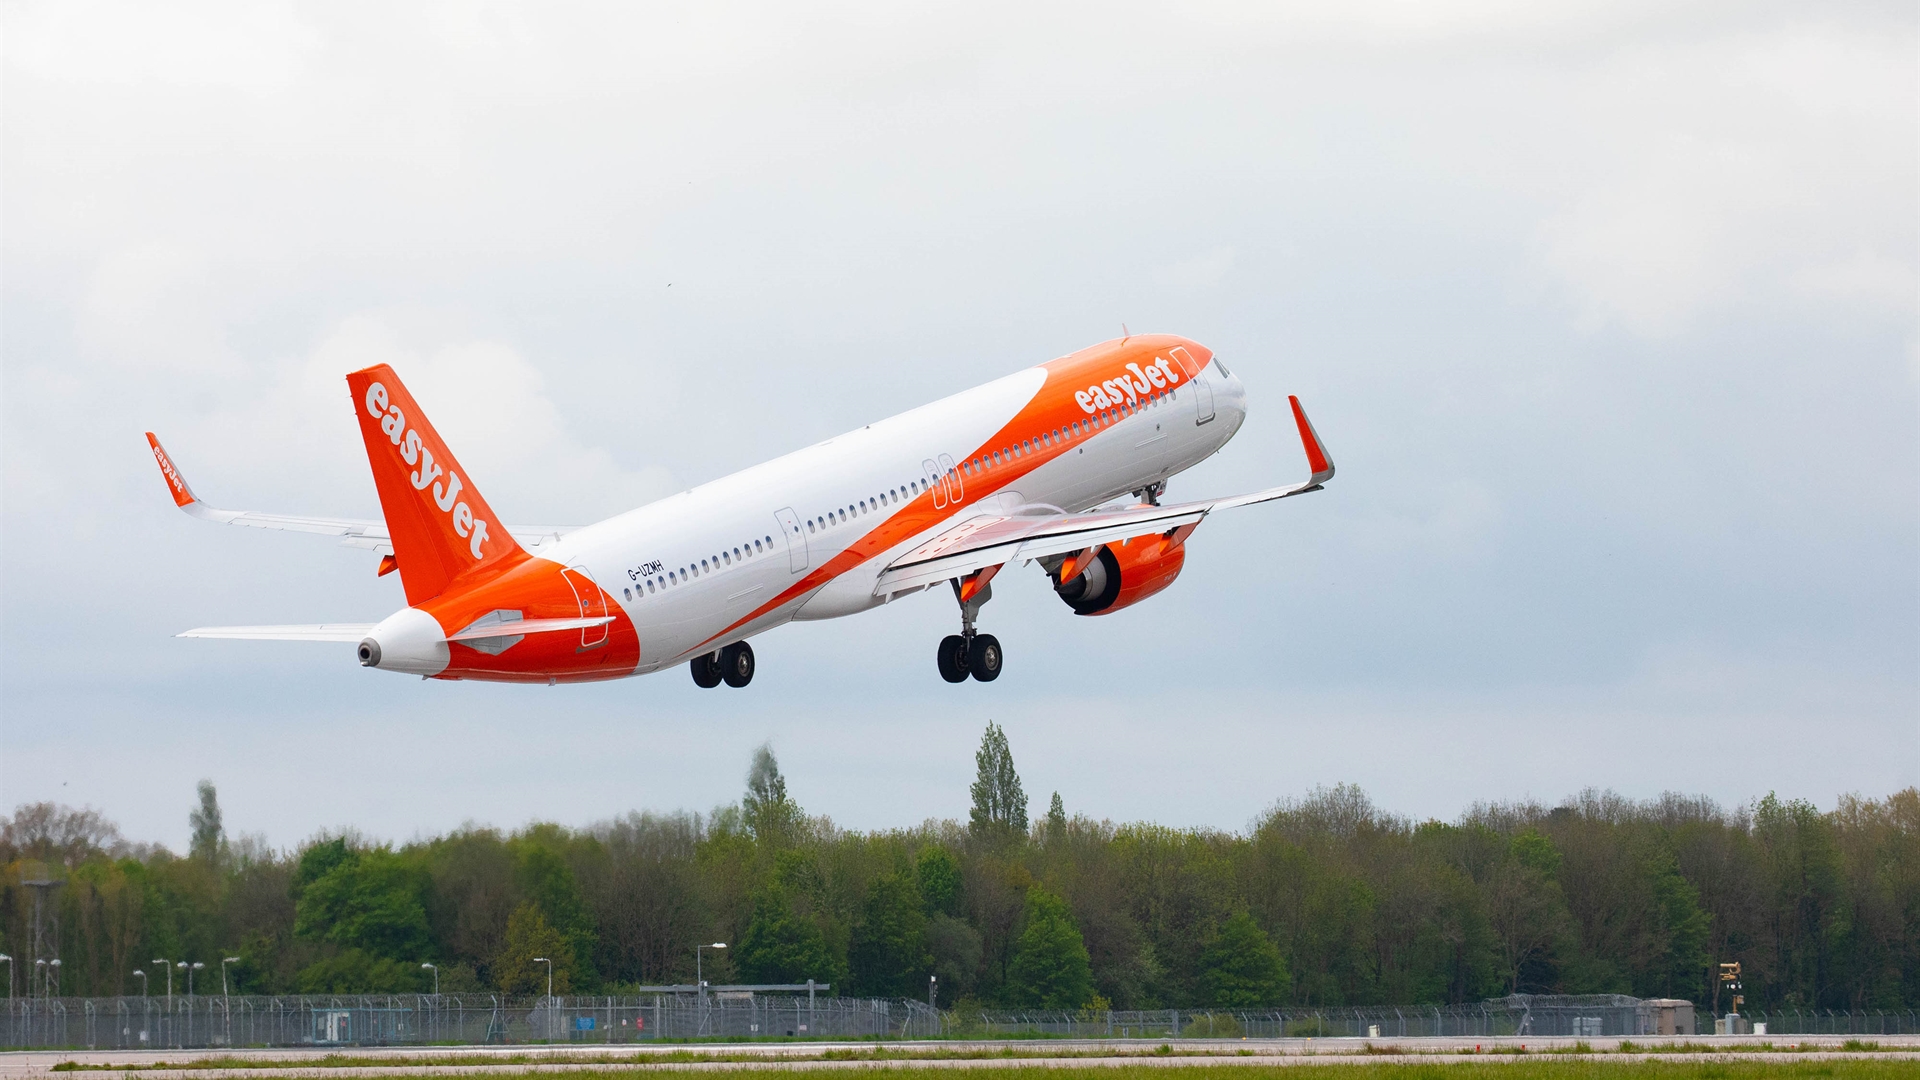 Christmas comes early as easyJet and easyJet holidays launch the